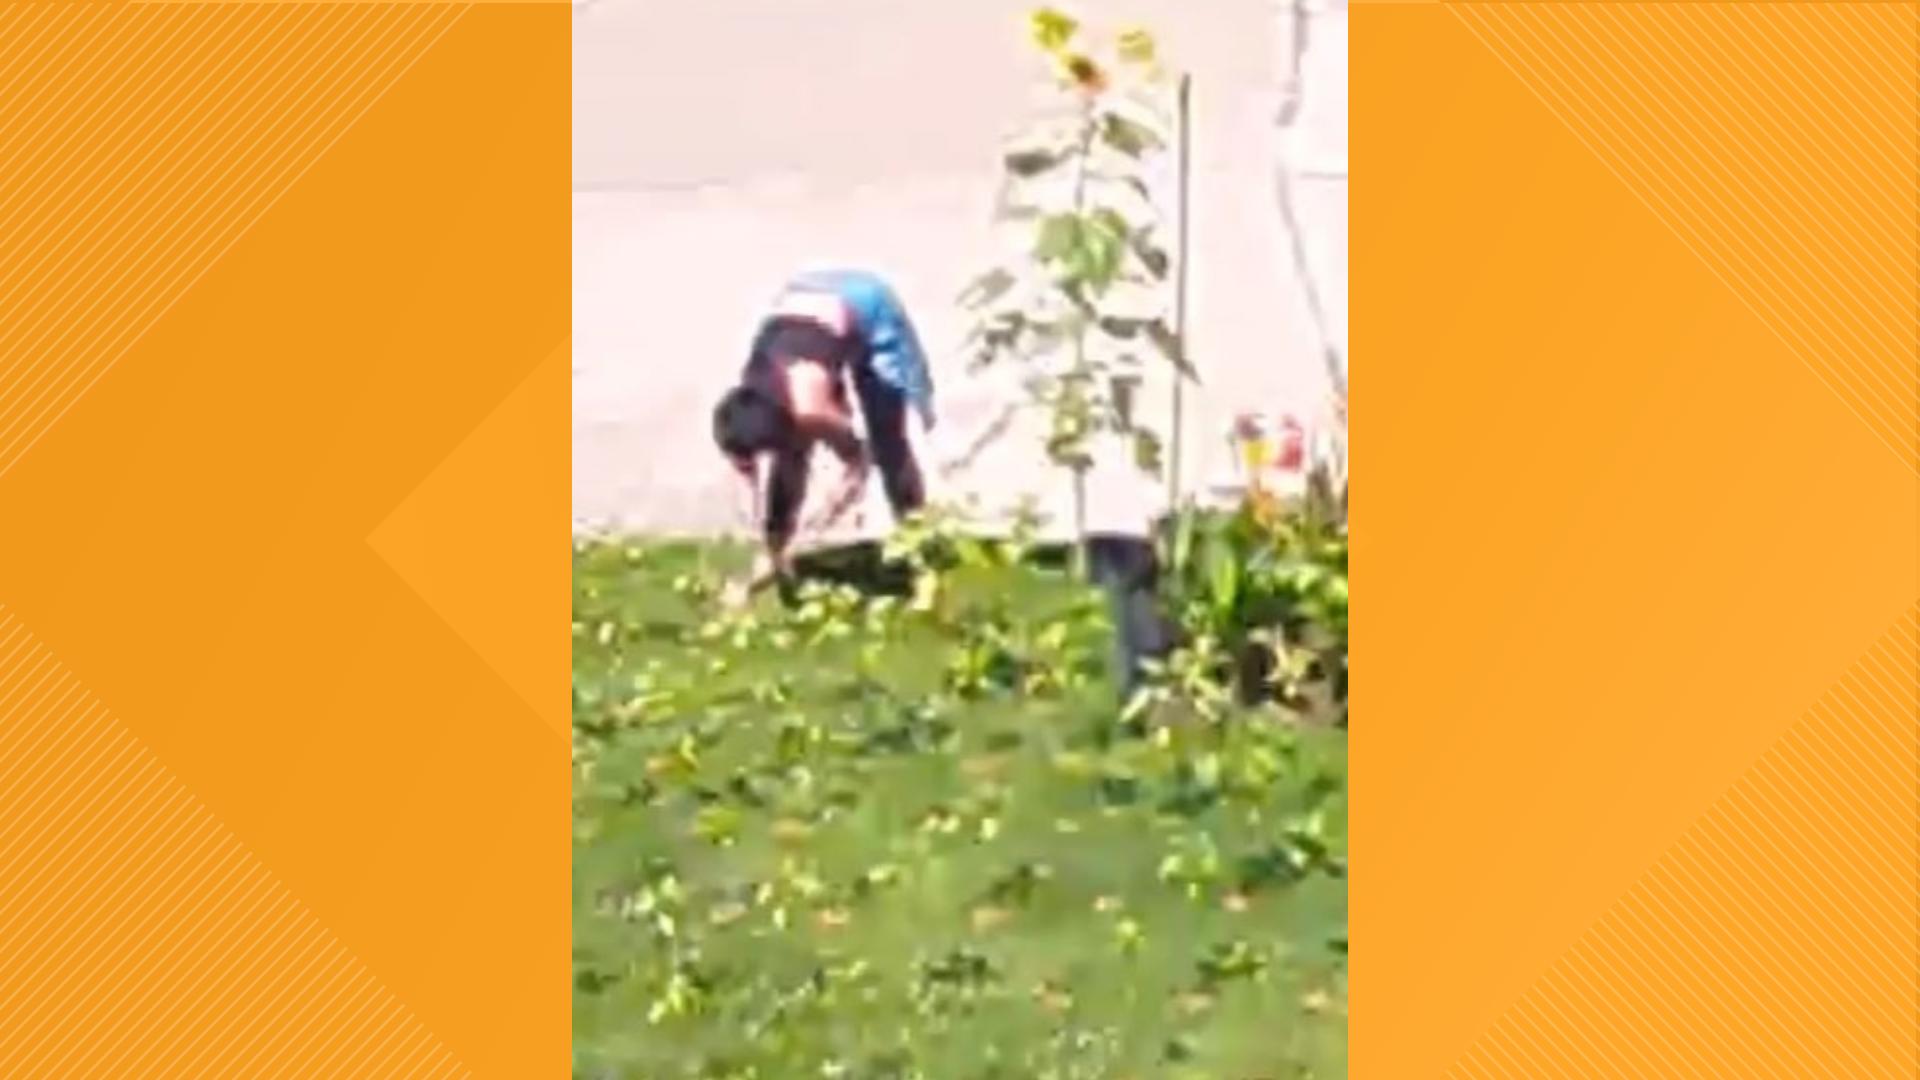 Chris Bank's home camera recorded the moment she exited her car and started cutting his sunflowers.